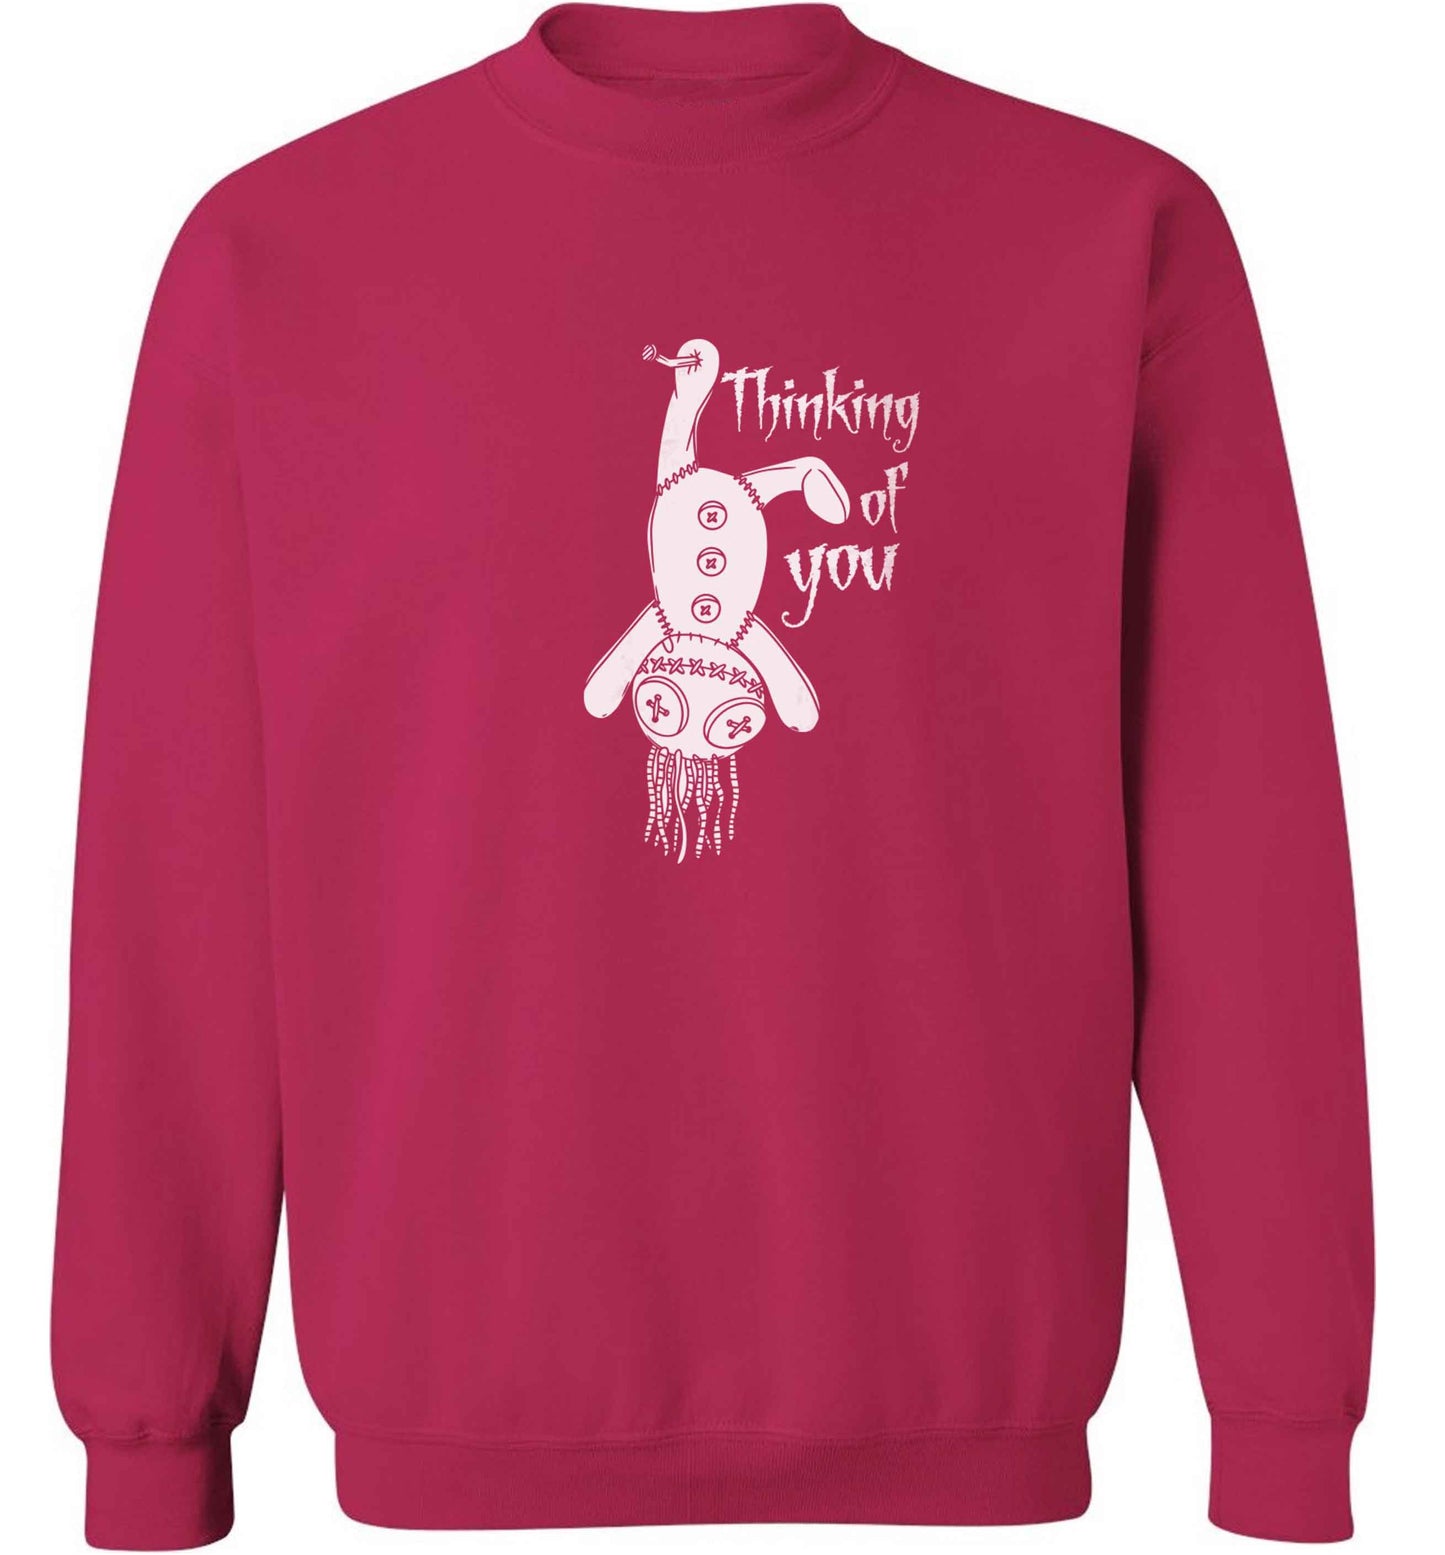 Thinking of you adult's unisex pink sweater 2XL